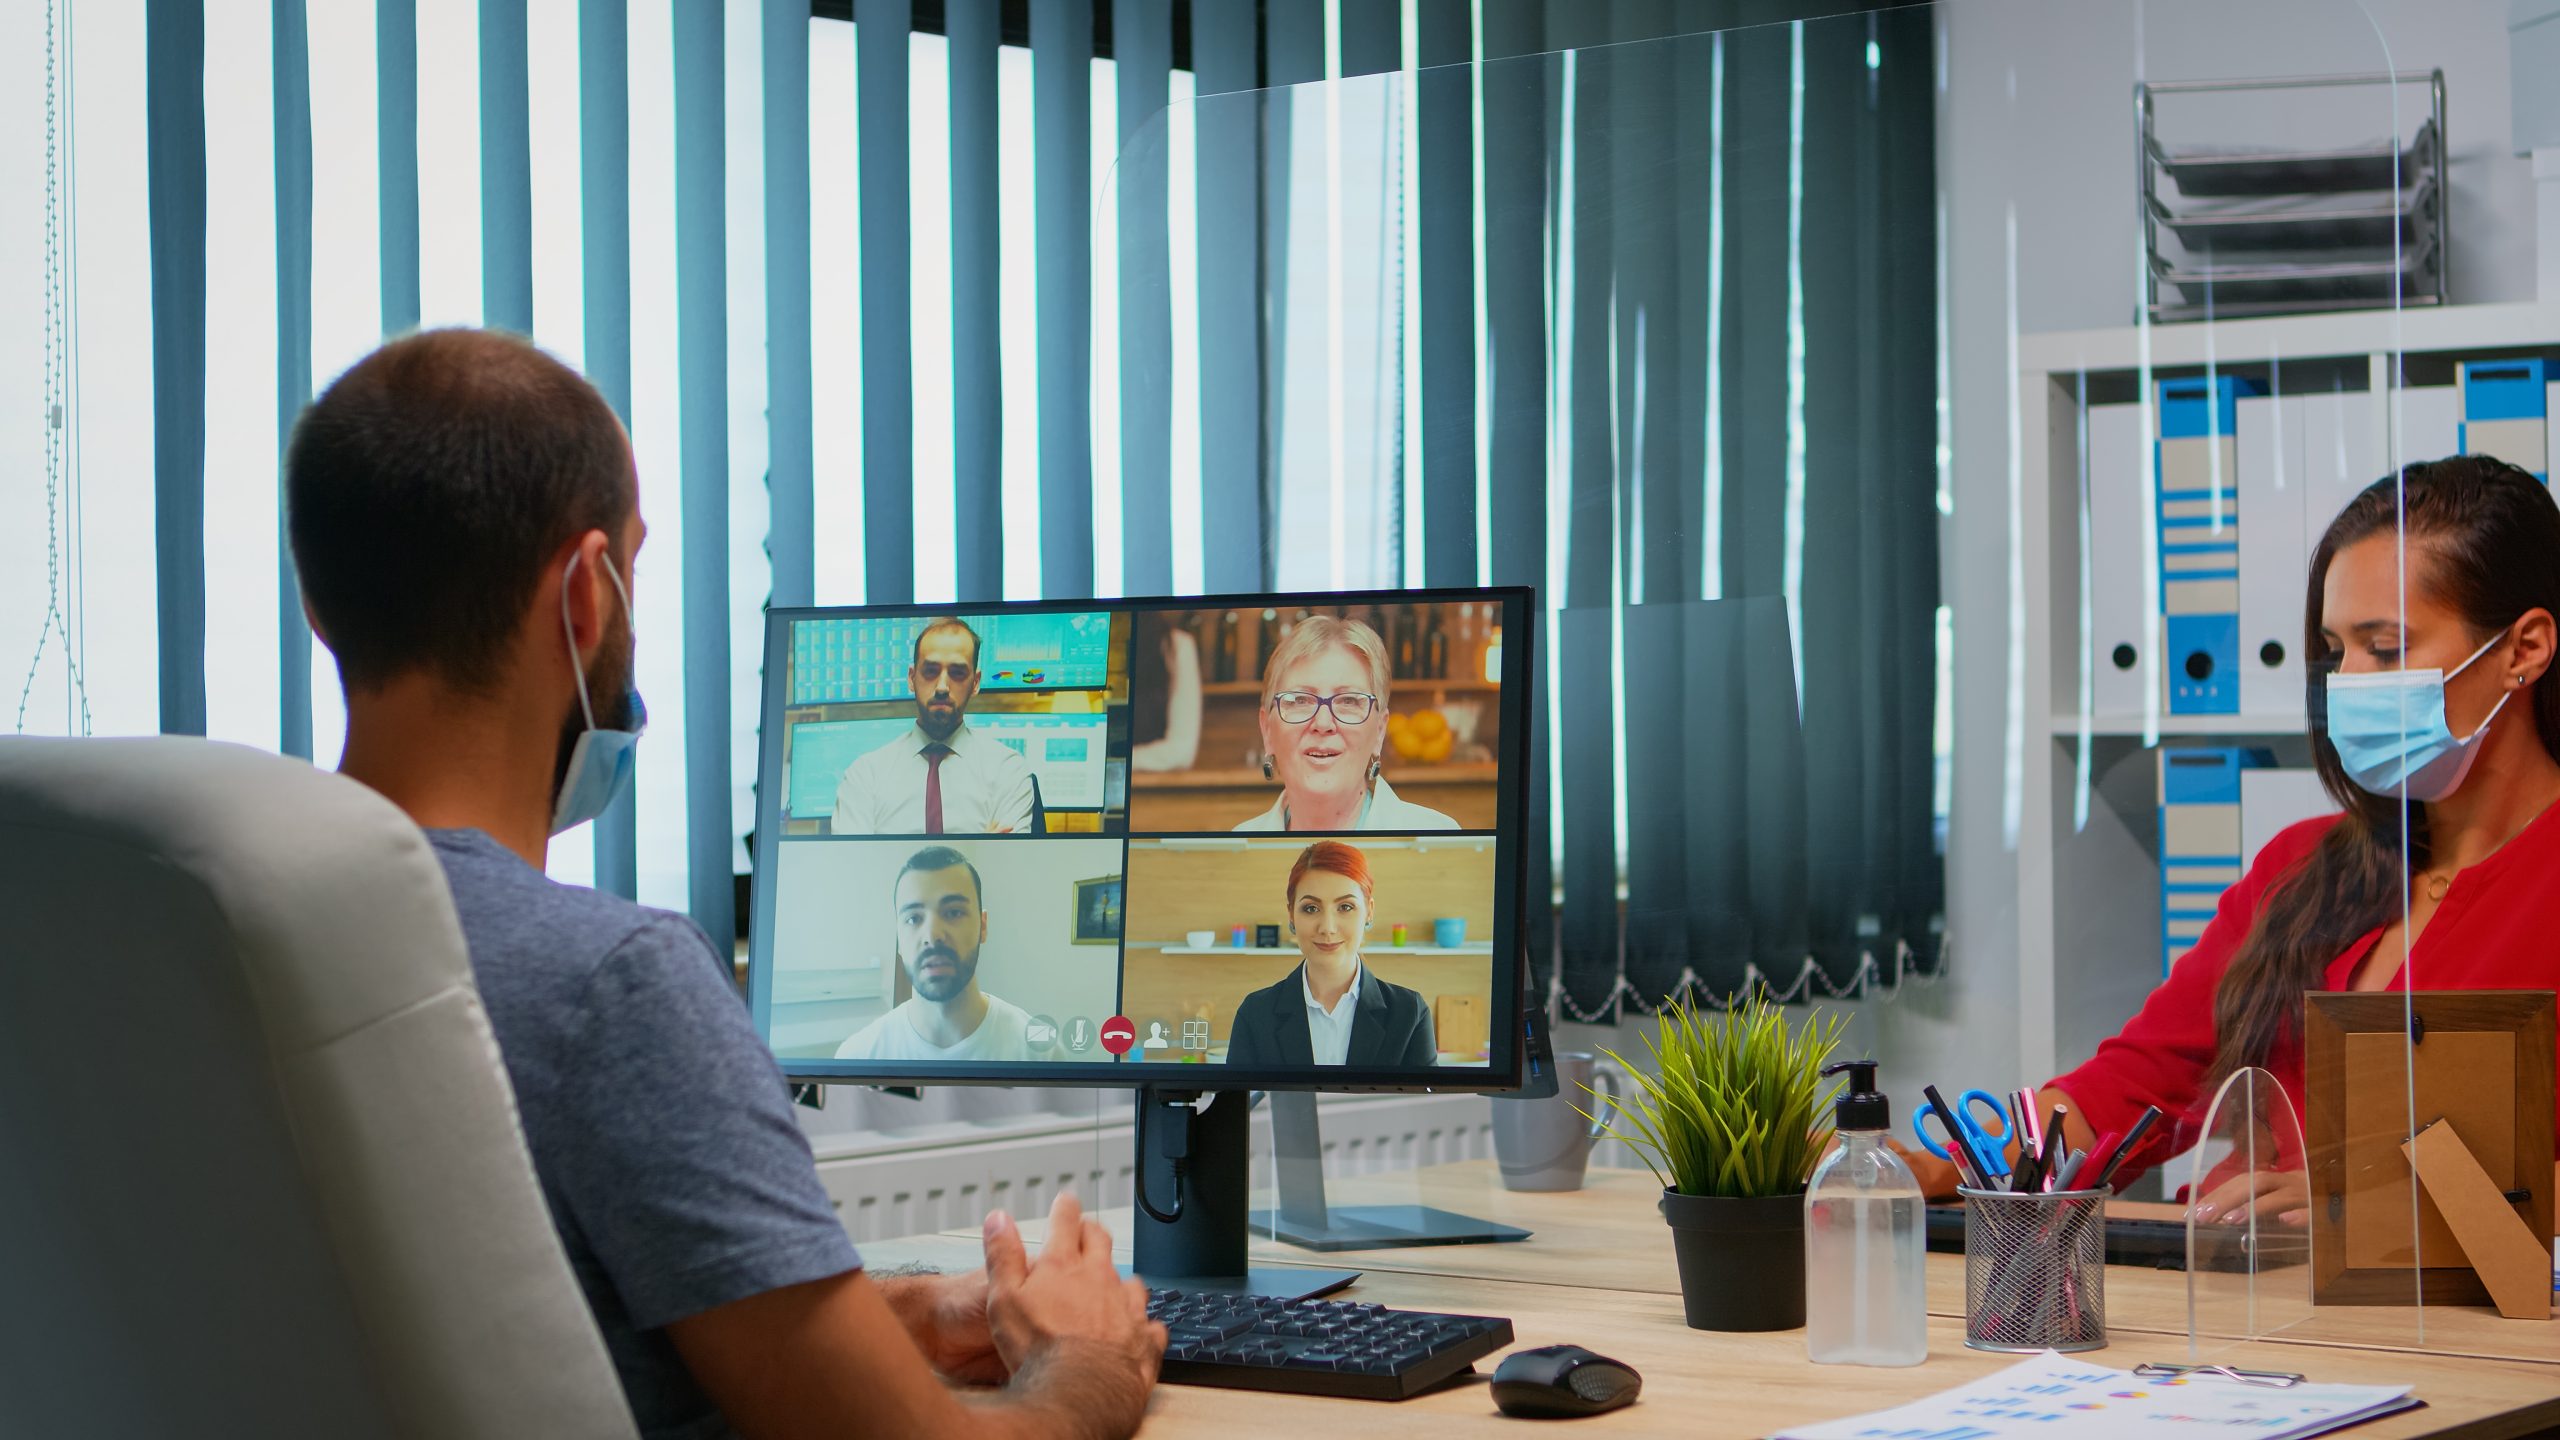 Connect remote and onsite workers with video collaboration tools.